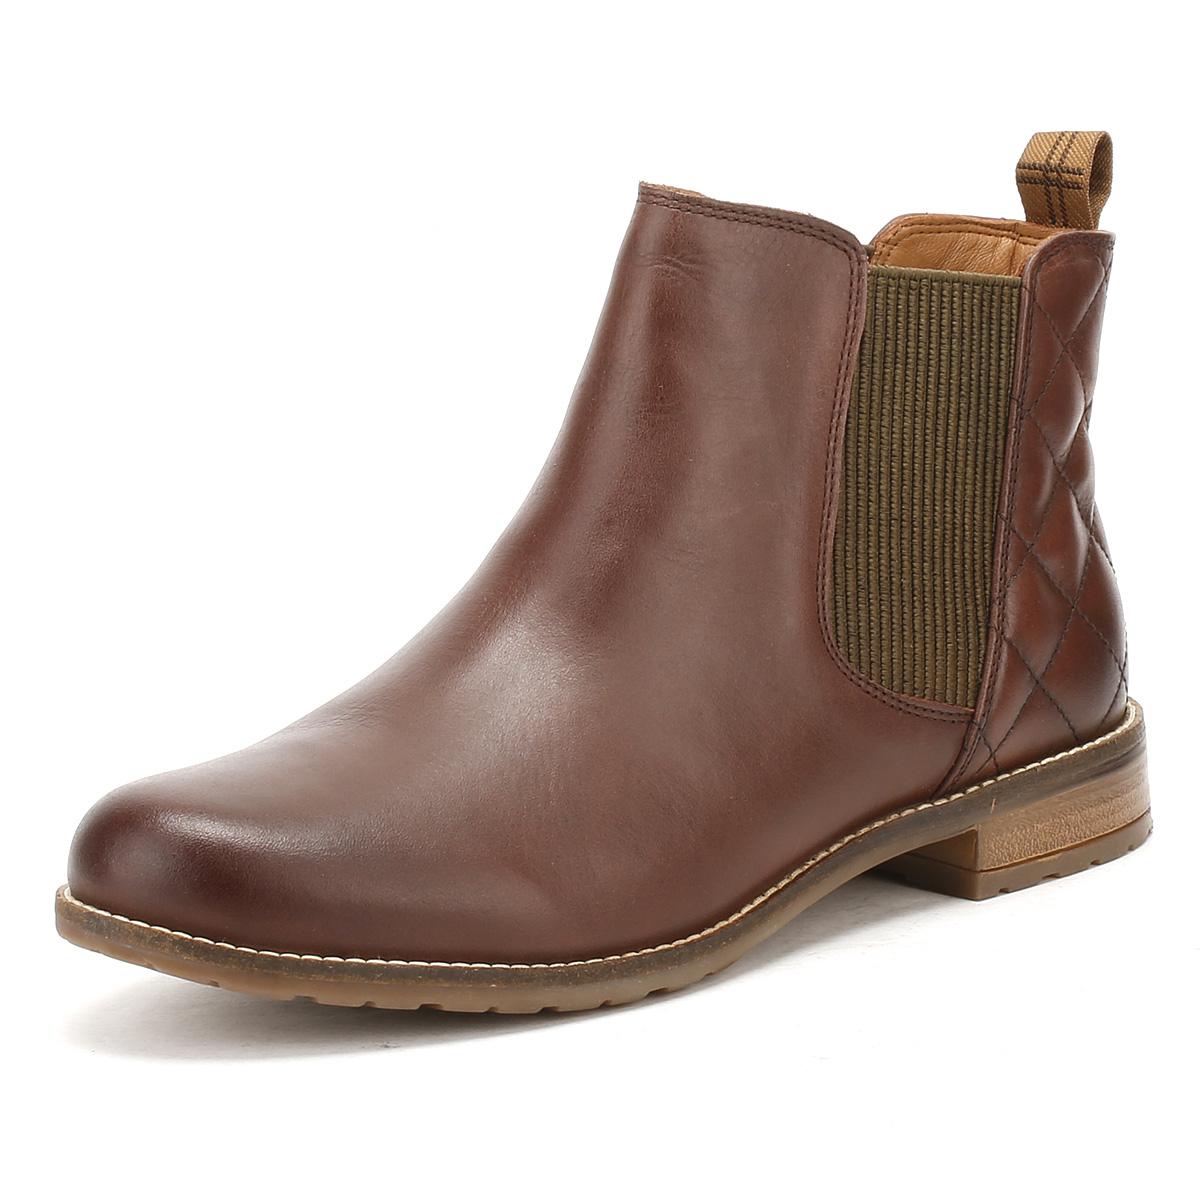 Barbour Womens Wine Brown Abigail Chelsea Boots Women's Low Ankle Boots ...